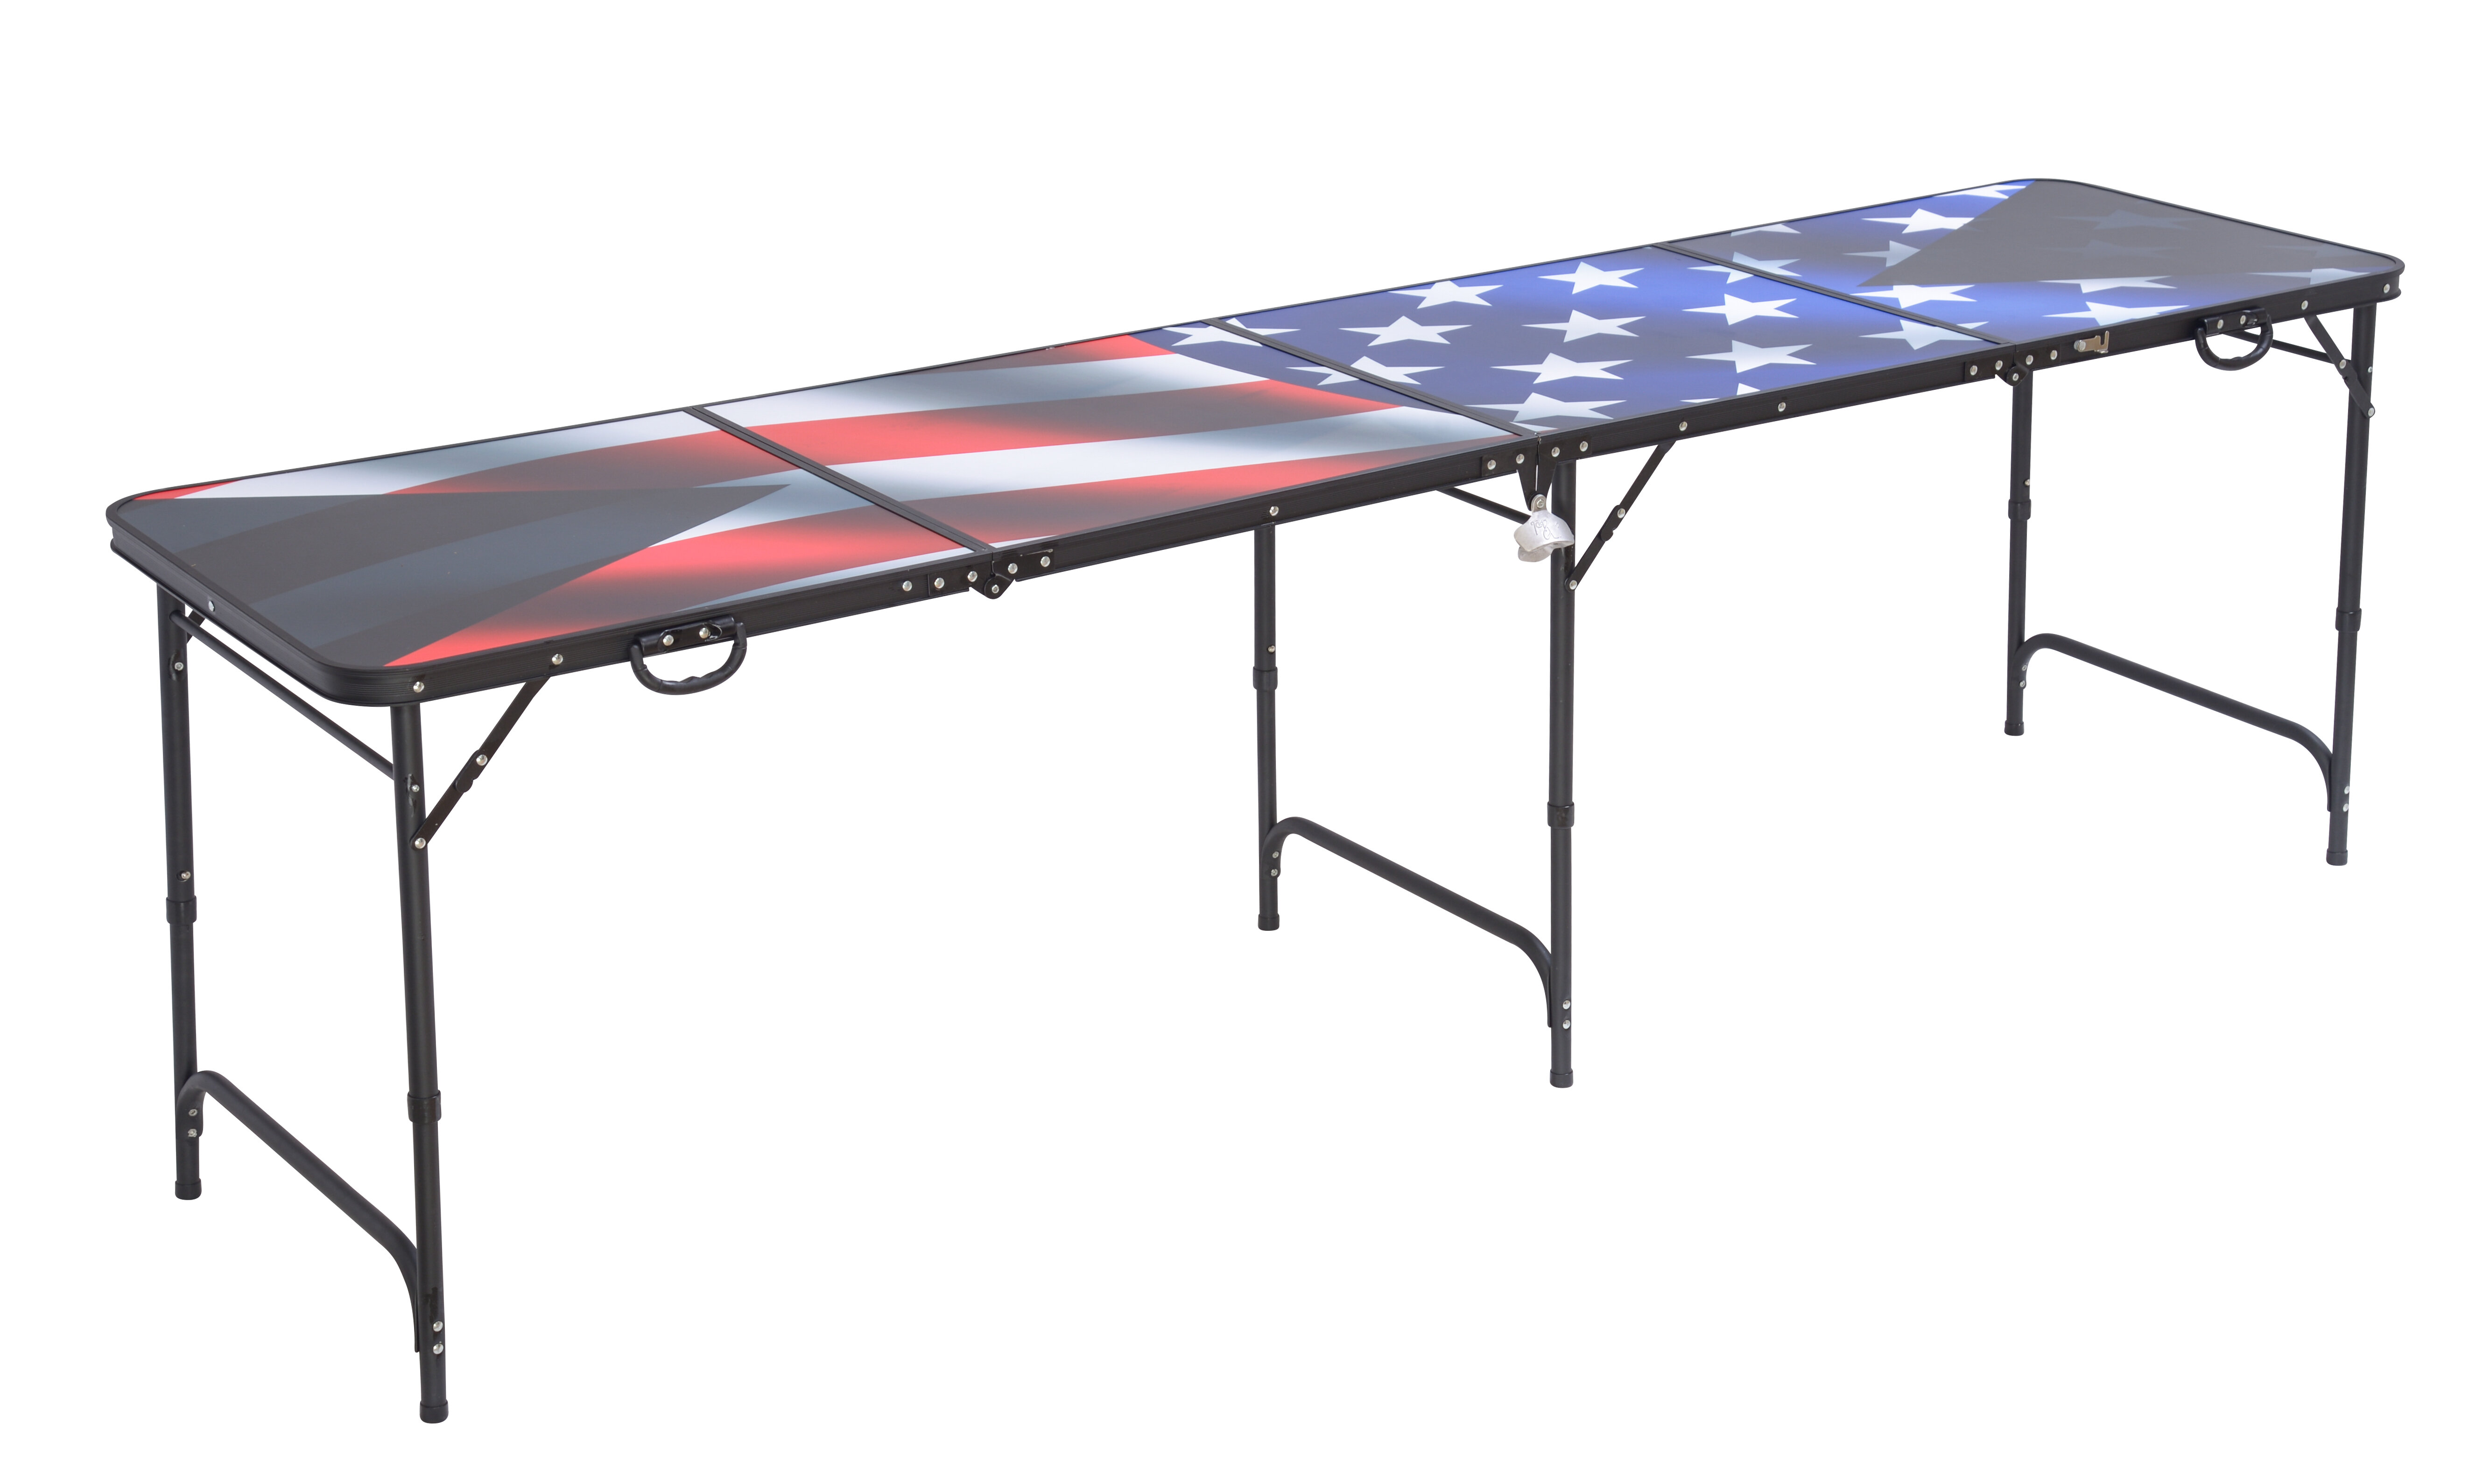 Foldable Aluminum Folding Beer Pong Table Portable Outdoor Indoor Game Party US 